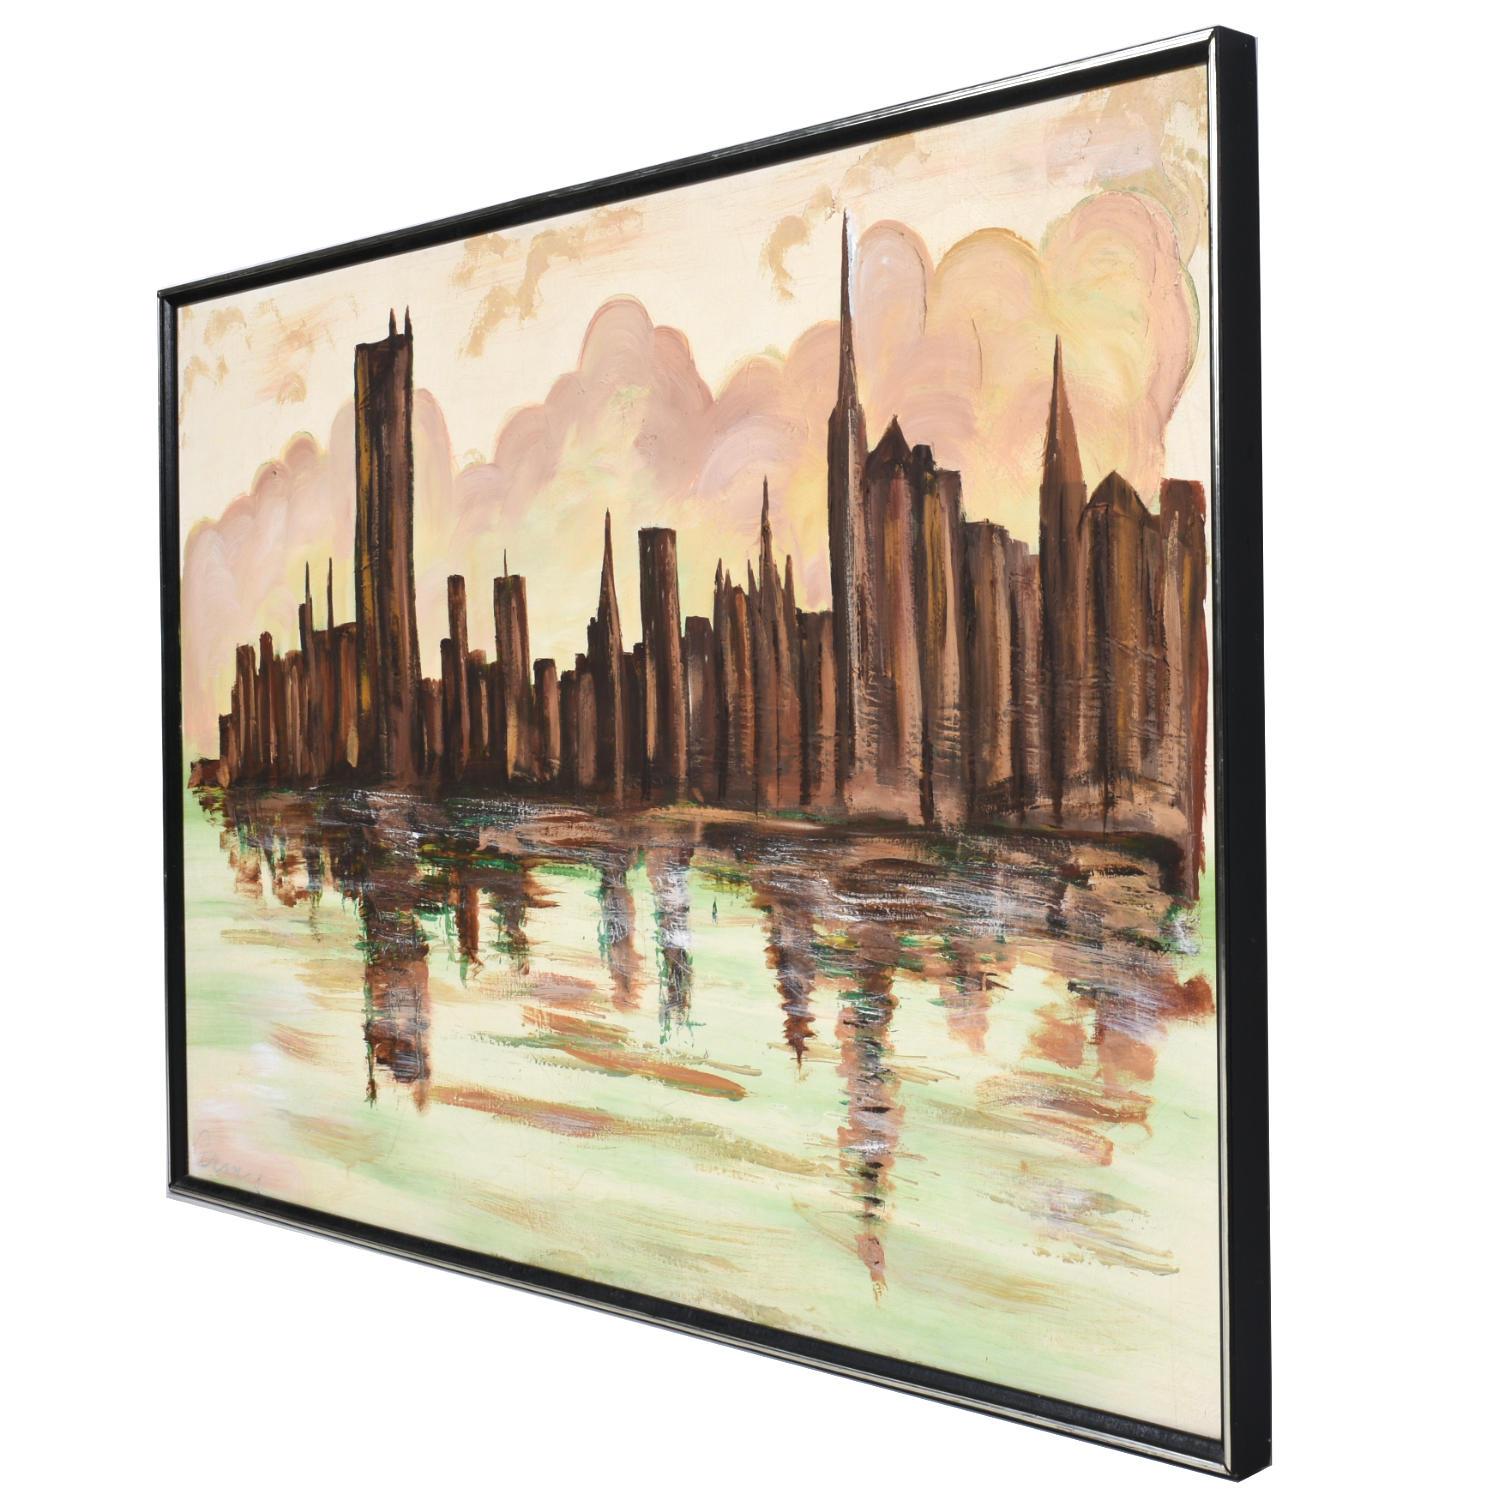 Extraordinary Mid-Century Modern cityscape painting with brown and green skyline. The large scale (5 foot) cityscape painting is reminiscent of work by Lee Reynolds. The heavily textured array of skyscrapers employs and impasto technique. The